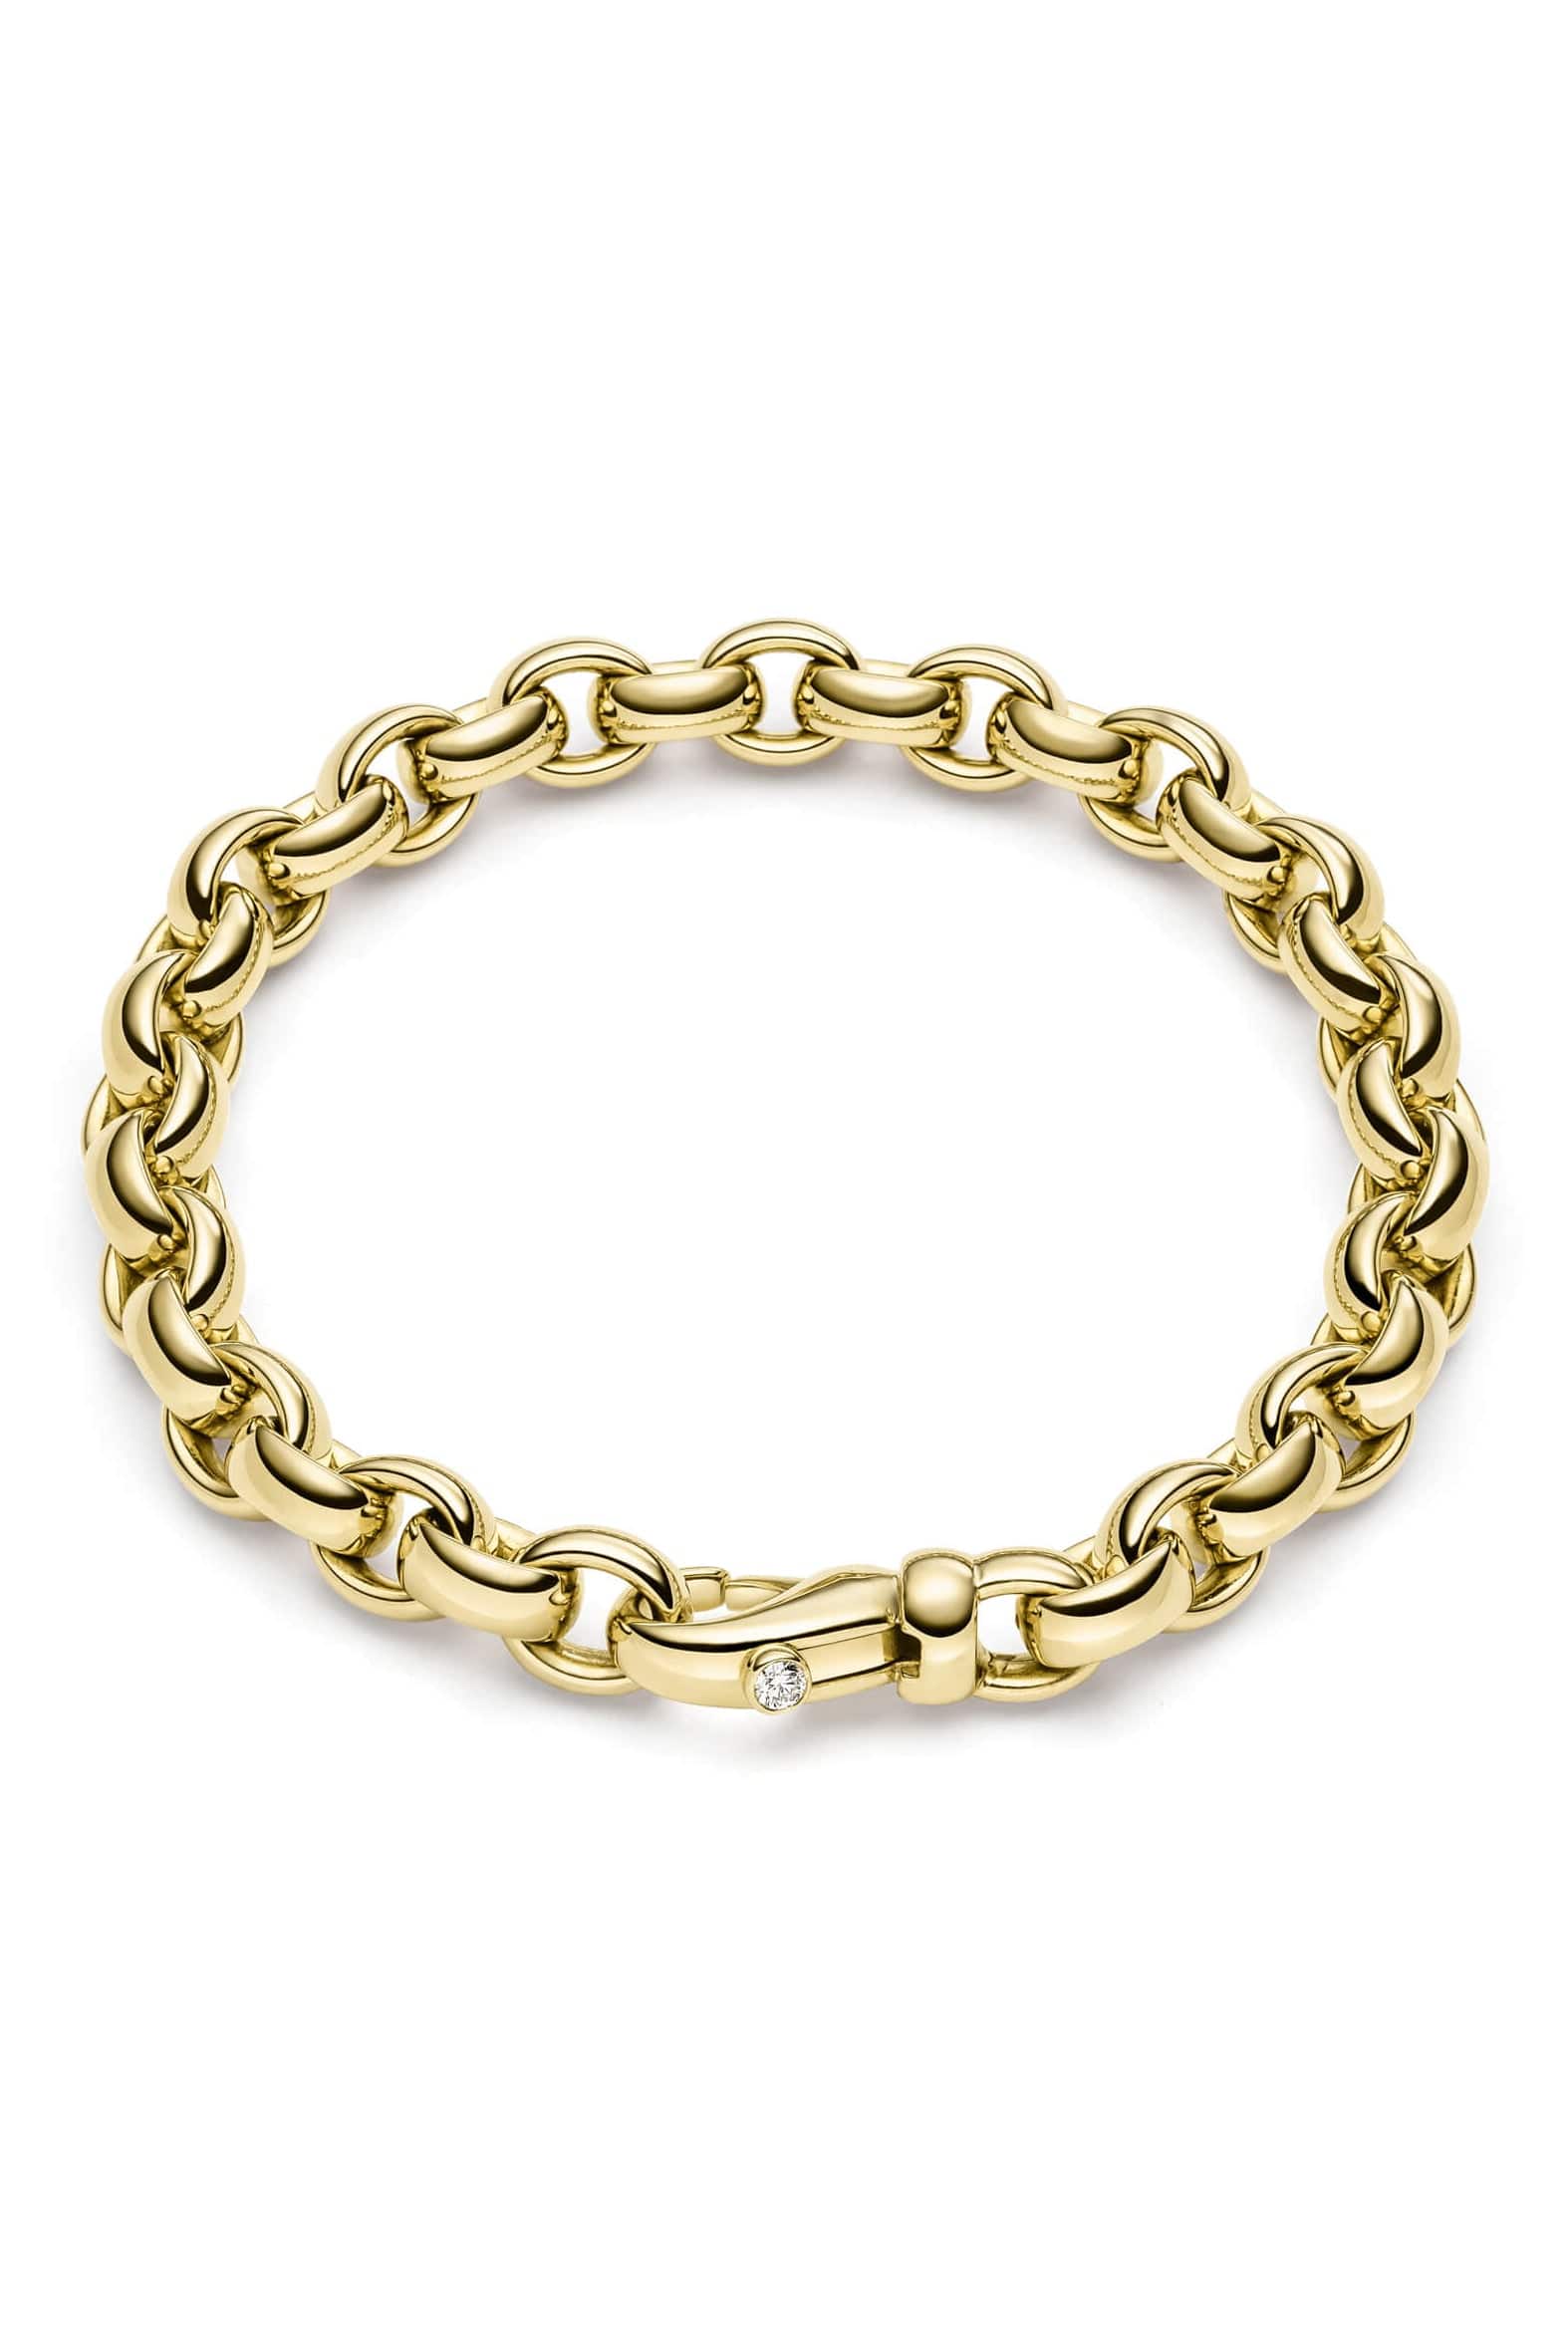 ISABELLE FA-ChaCha Bracelet-YELLOW GOLD